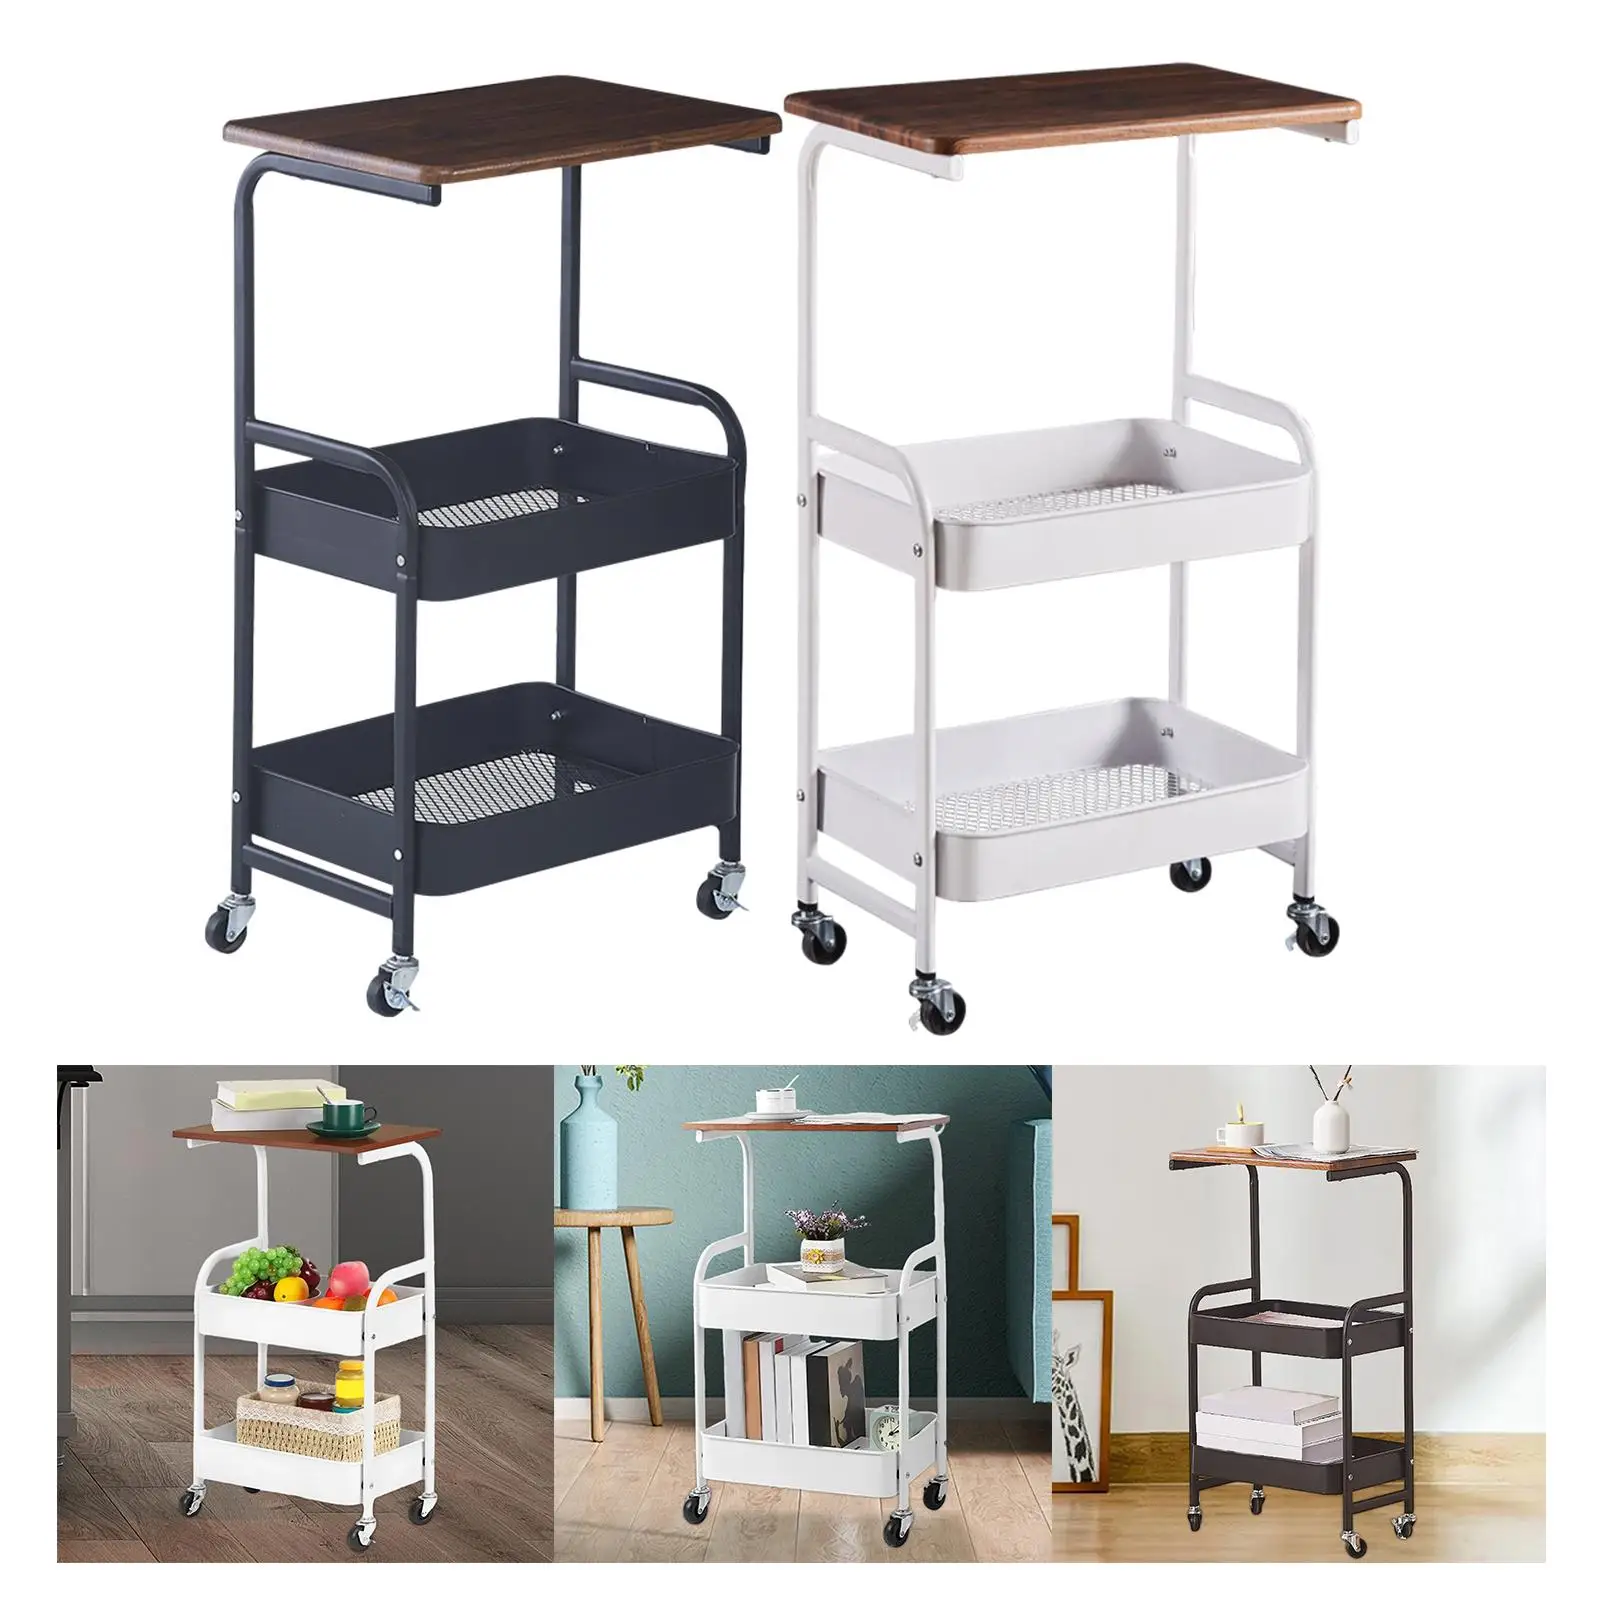 Slim Storage Cart Multipurpose Waterproof Classic Durable Fruits Rack Rolling Cart for Laundry Room Narrow Place Kitchen Bedroom